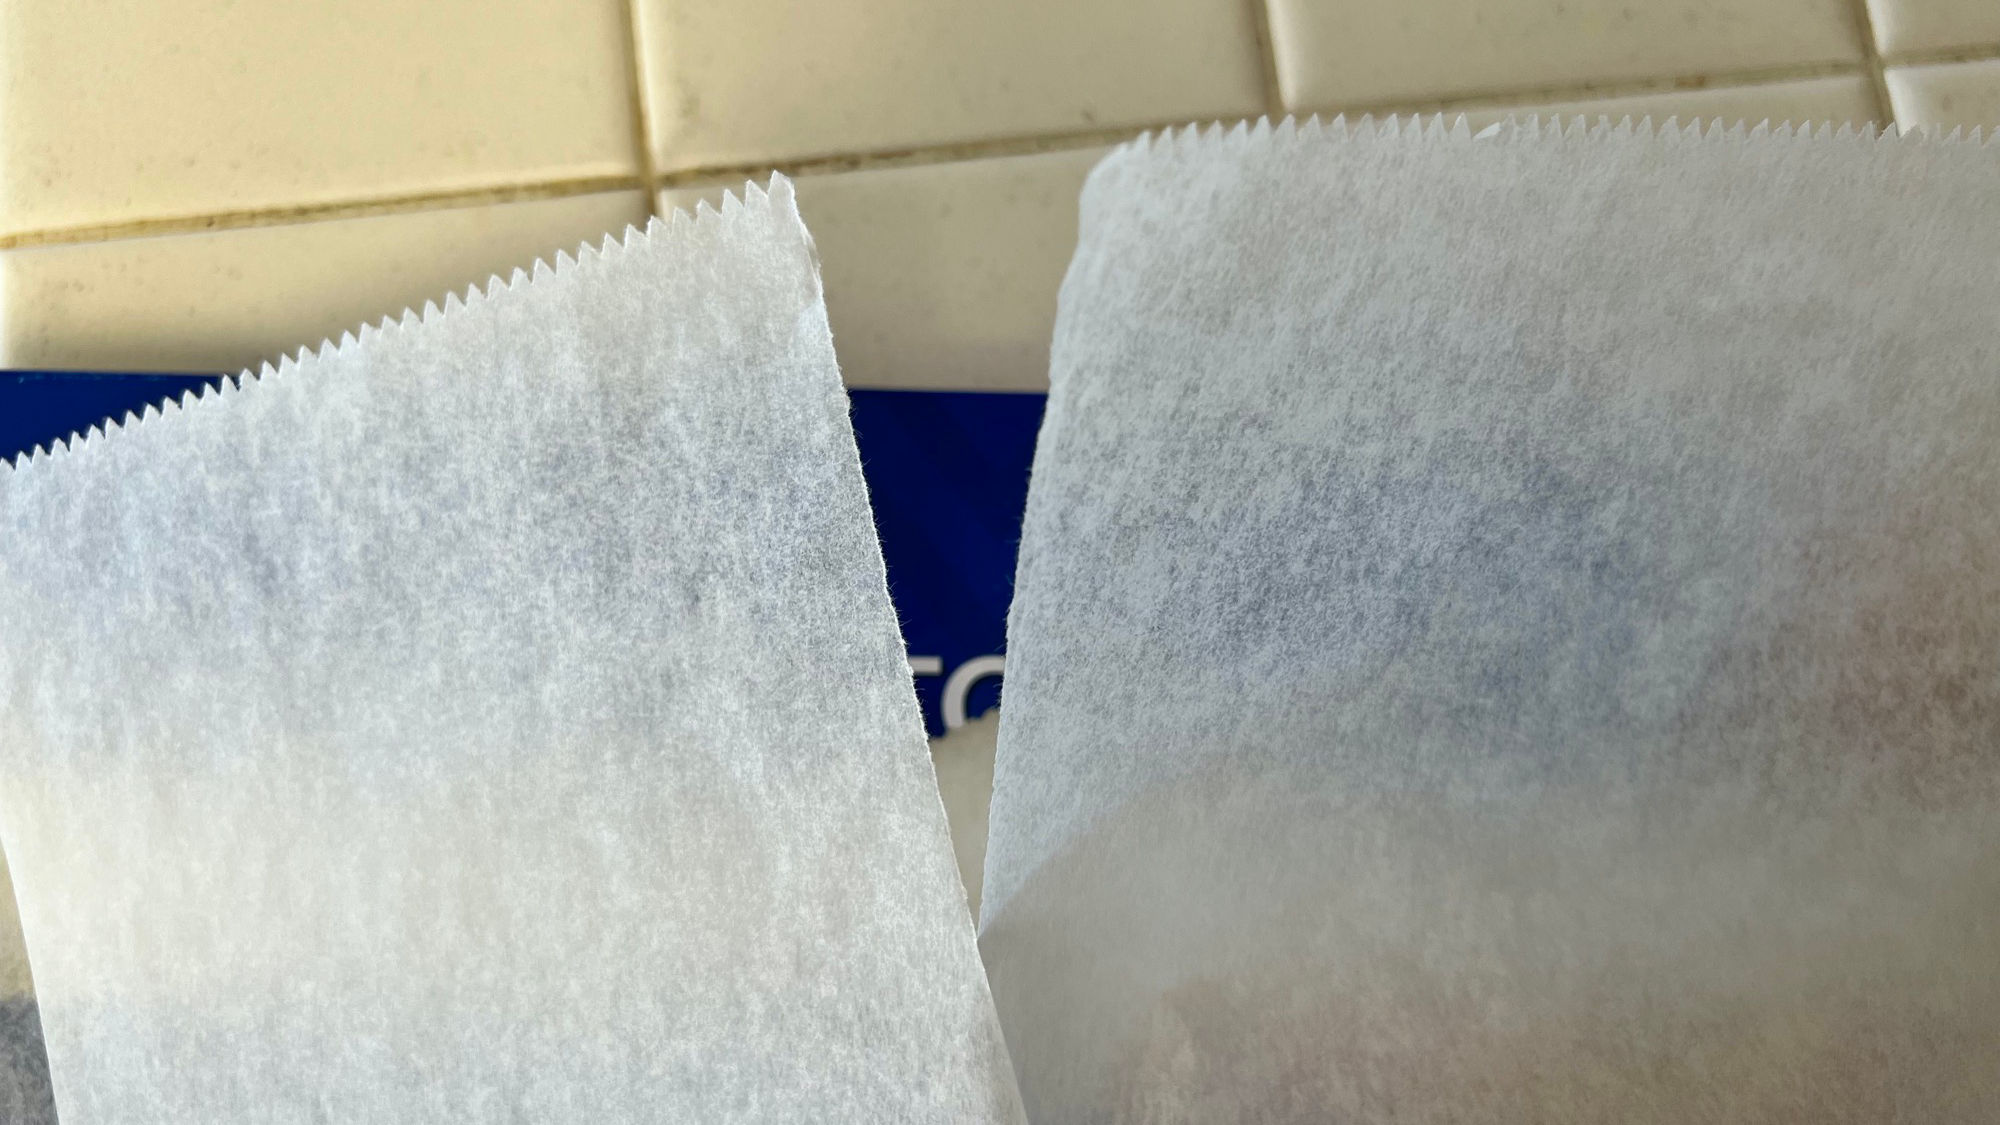 Tearing Parchment Paper Tears Easily